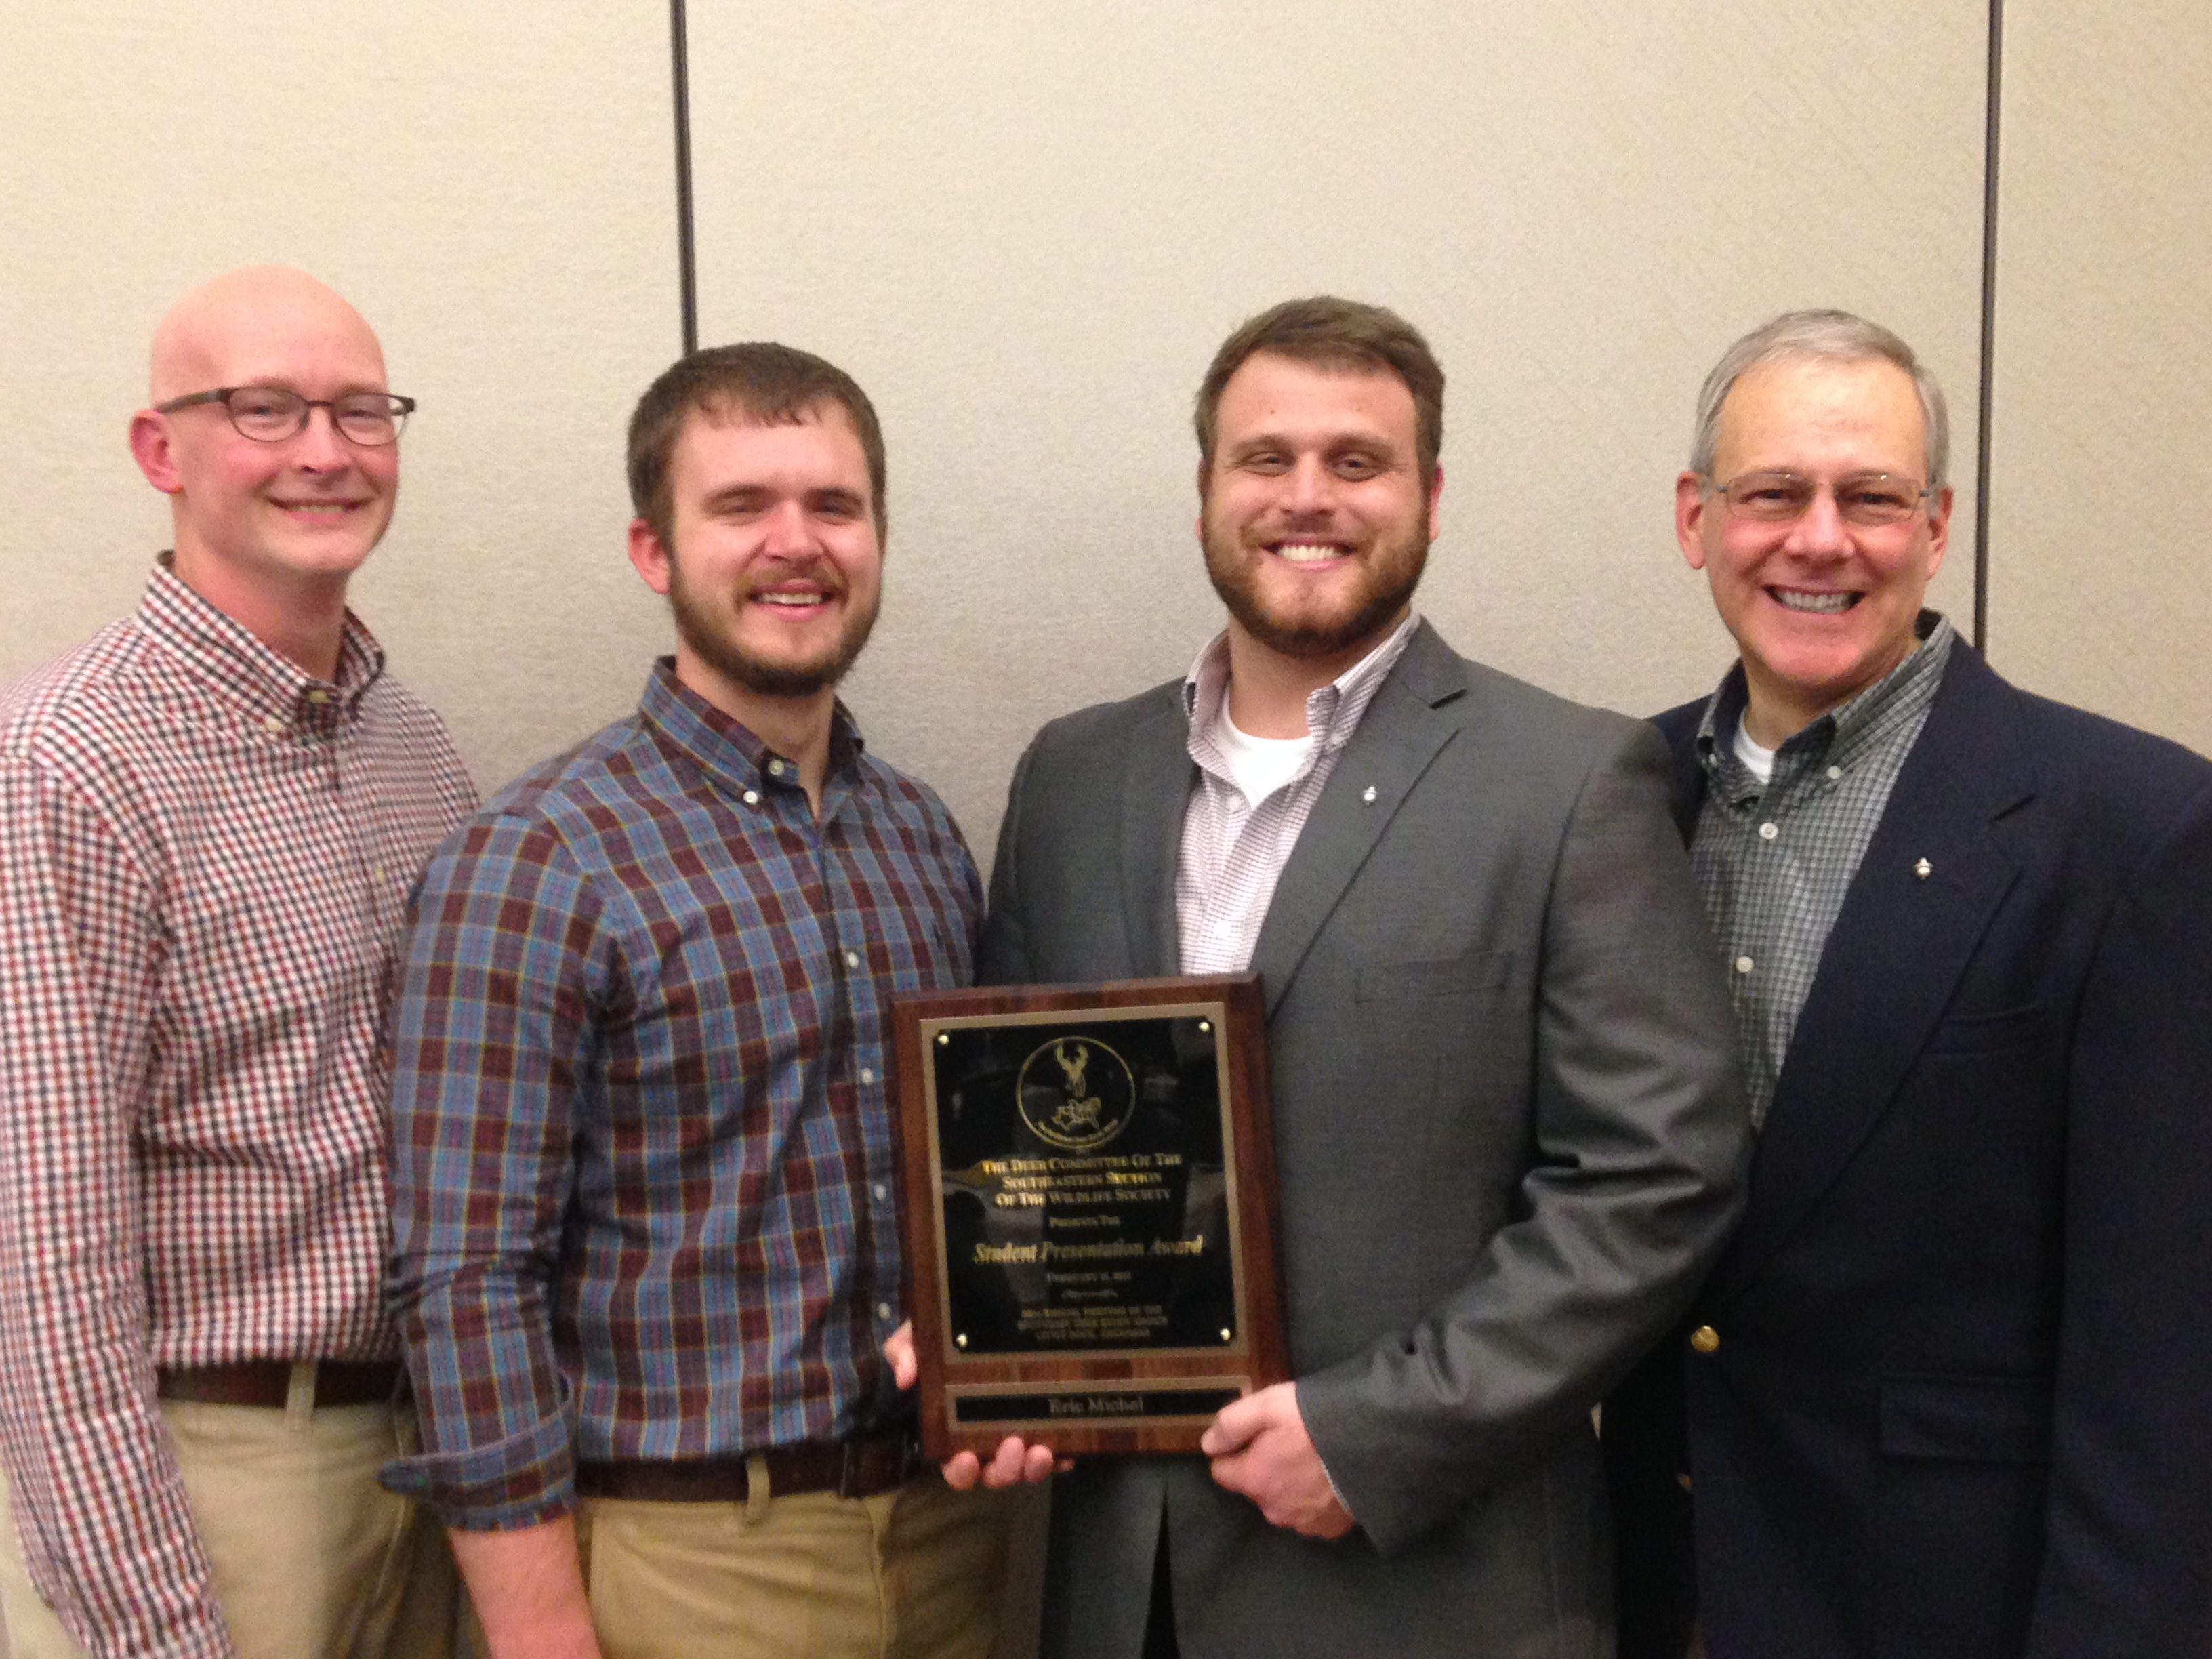 From left, Bronson Strickland, Caleb Hinton, Eric Michel and Steve Demarais at the 38th Annual Meeting of the Southeast Deer Study Group.